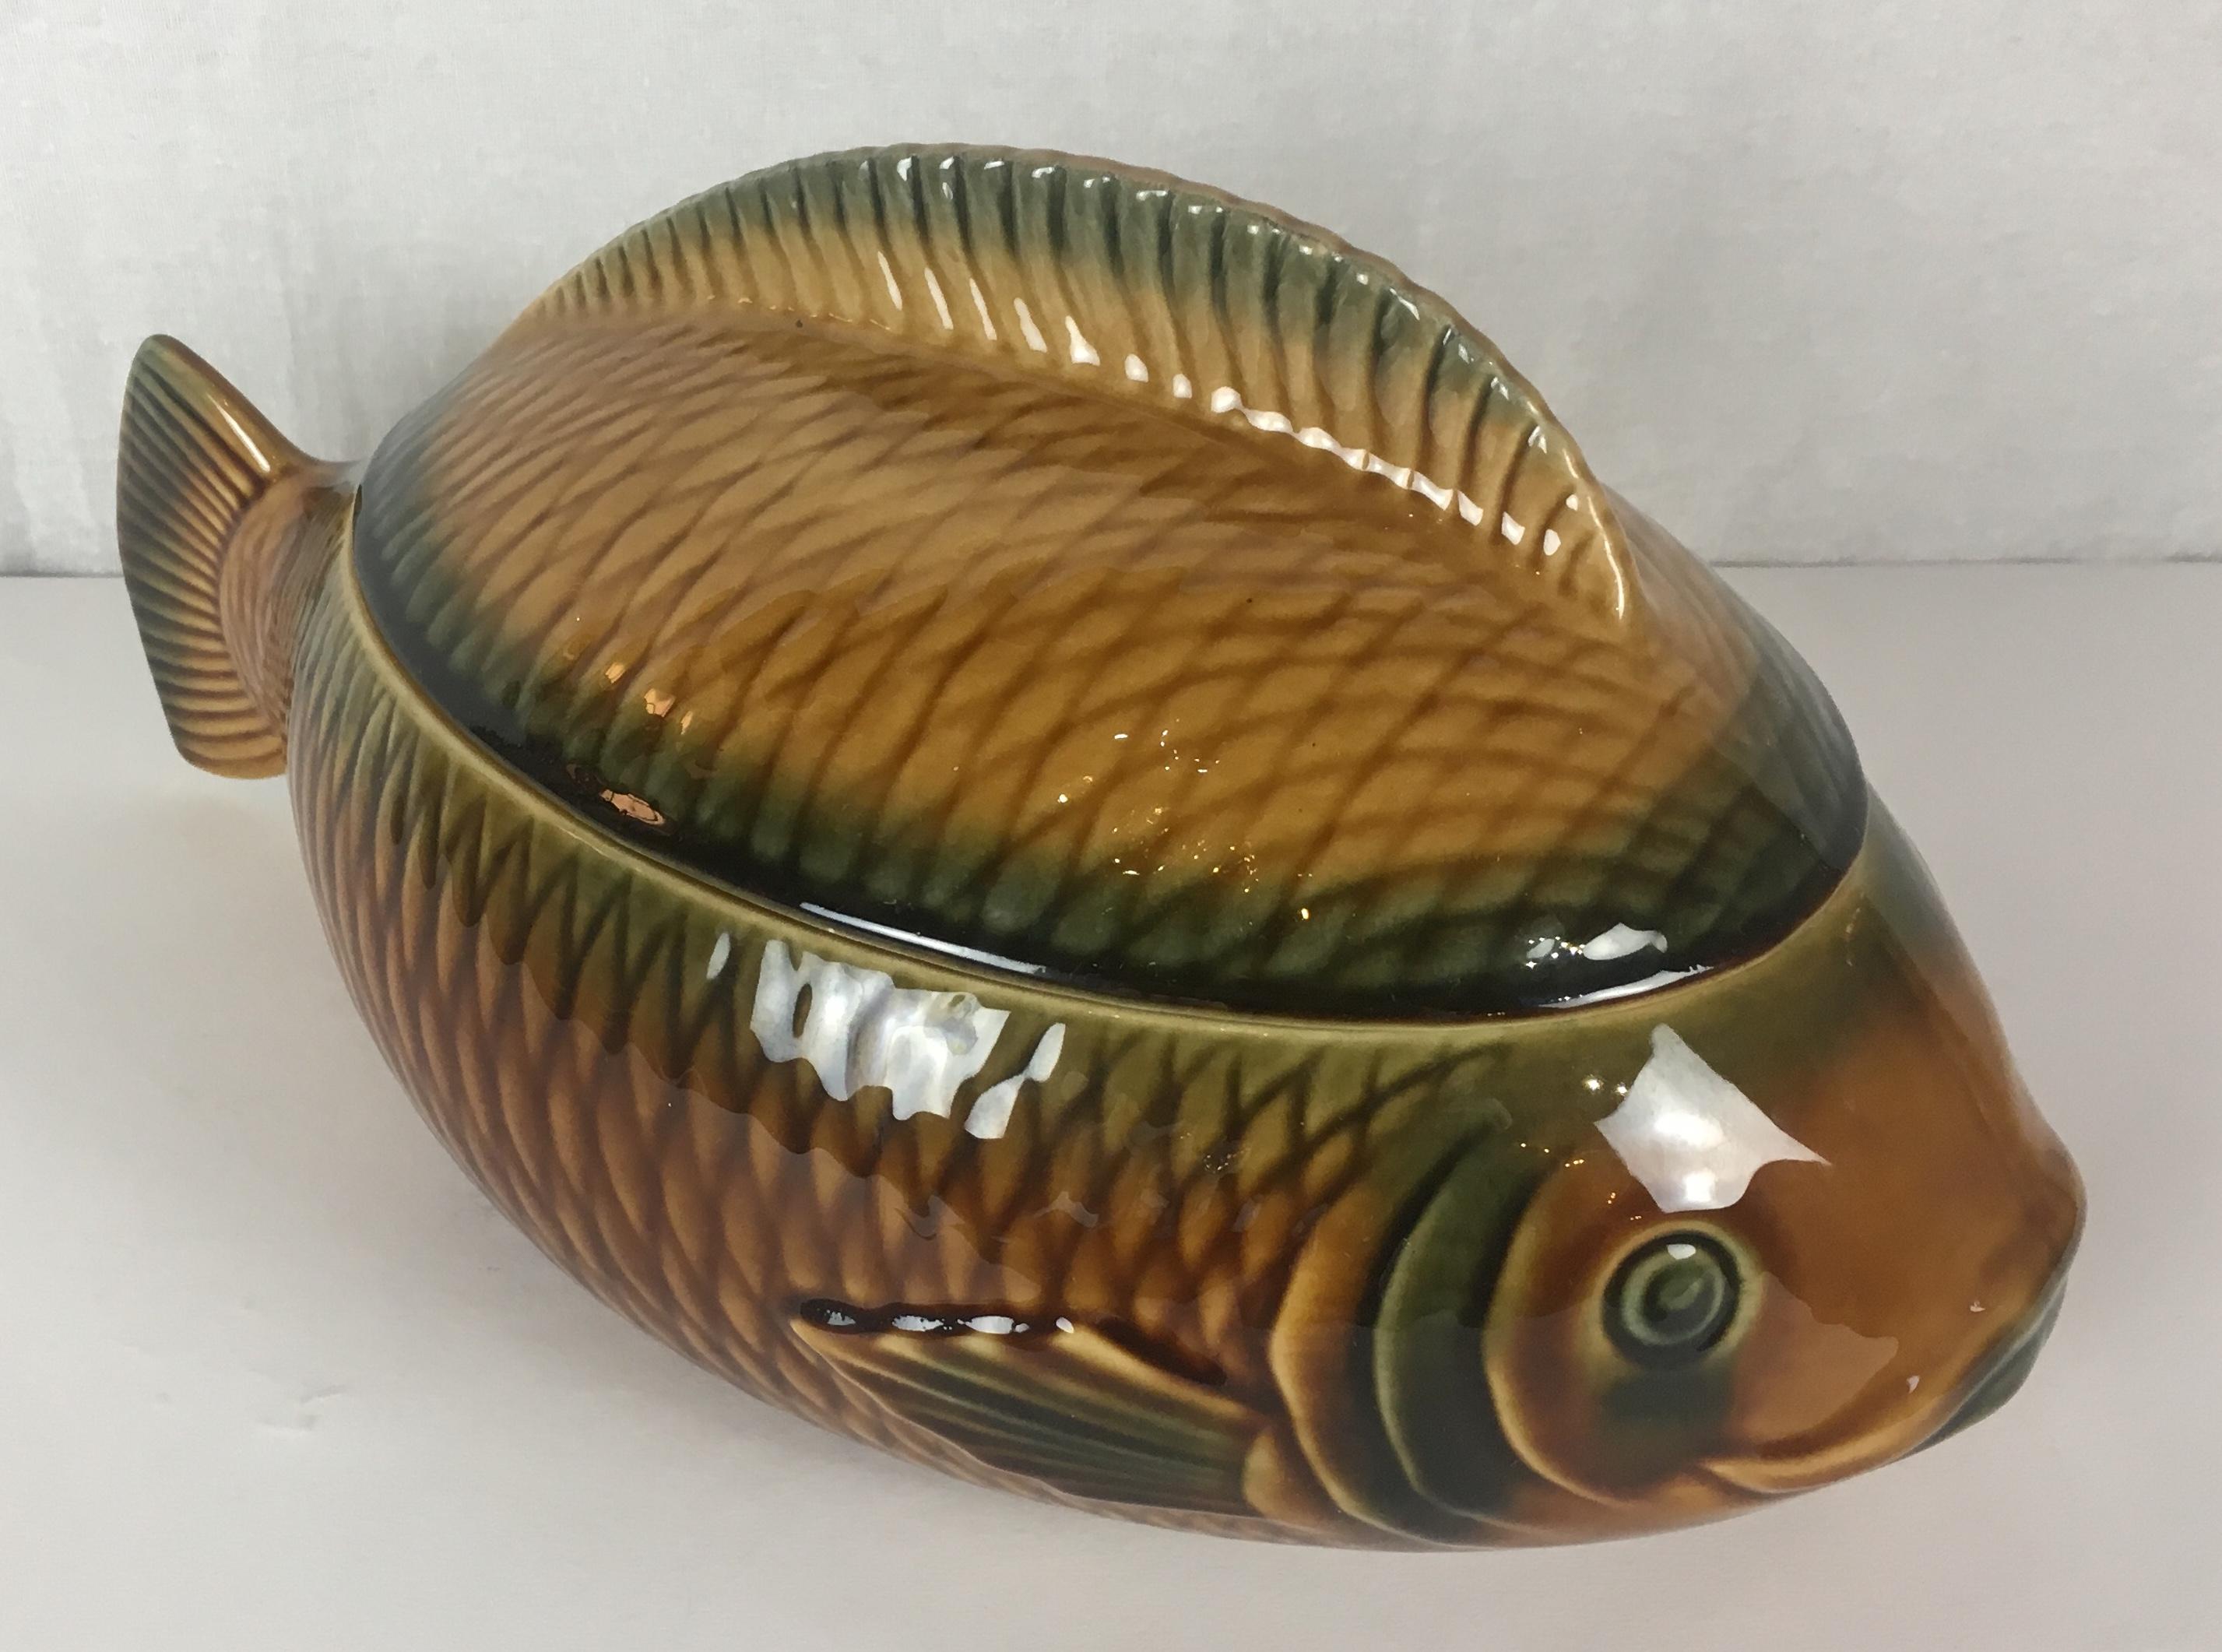 Ceramic 14 Piece Sarreguemines Majolica Fish Plates, Bowls, Soup Tureen and Sauce Boat For Sale